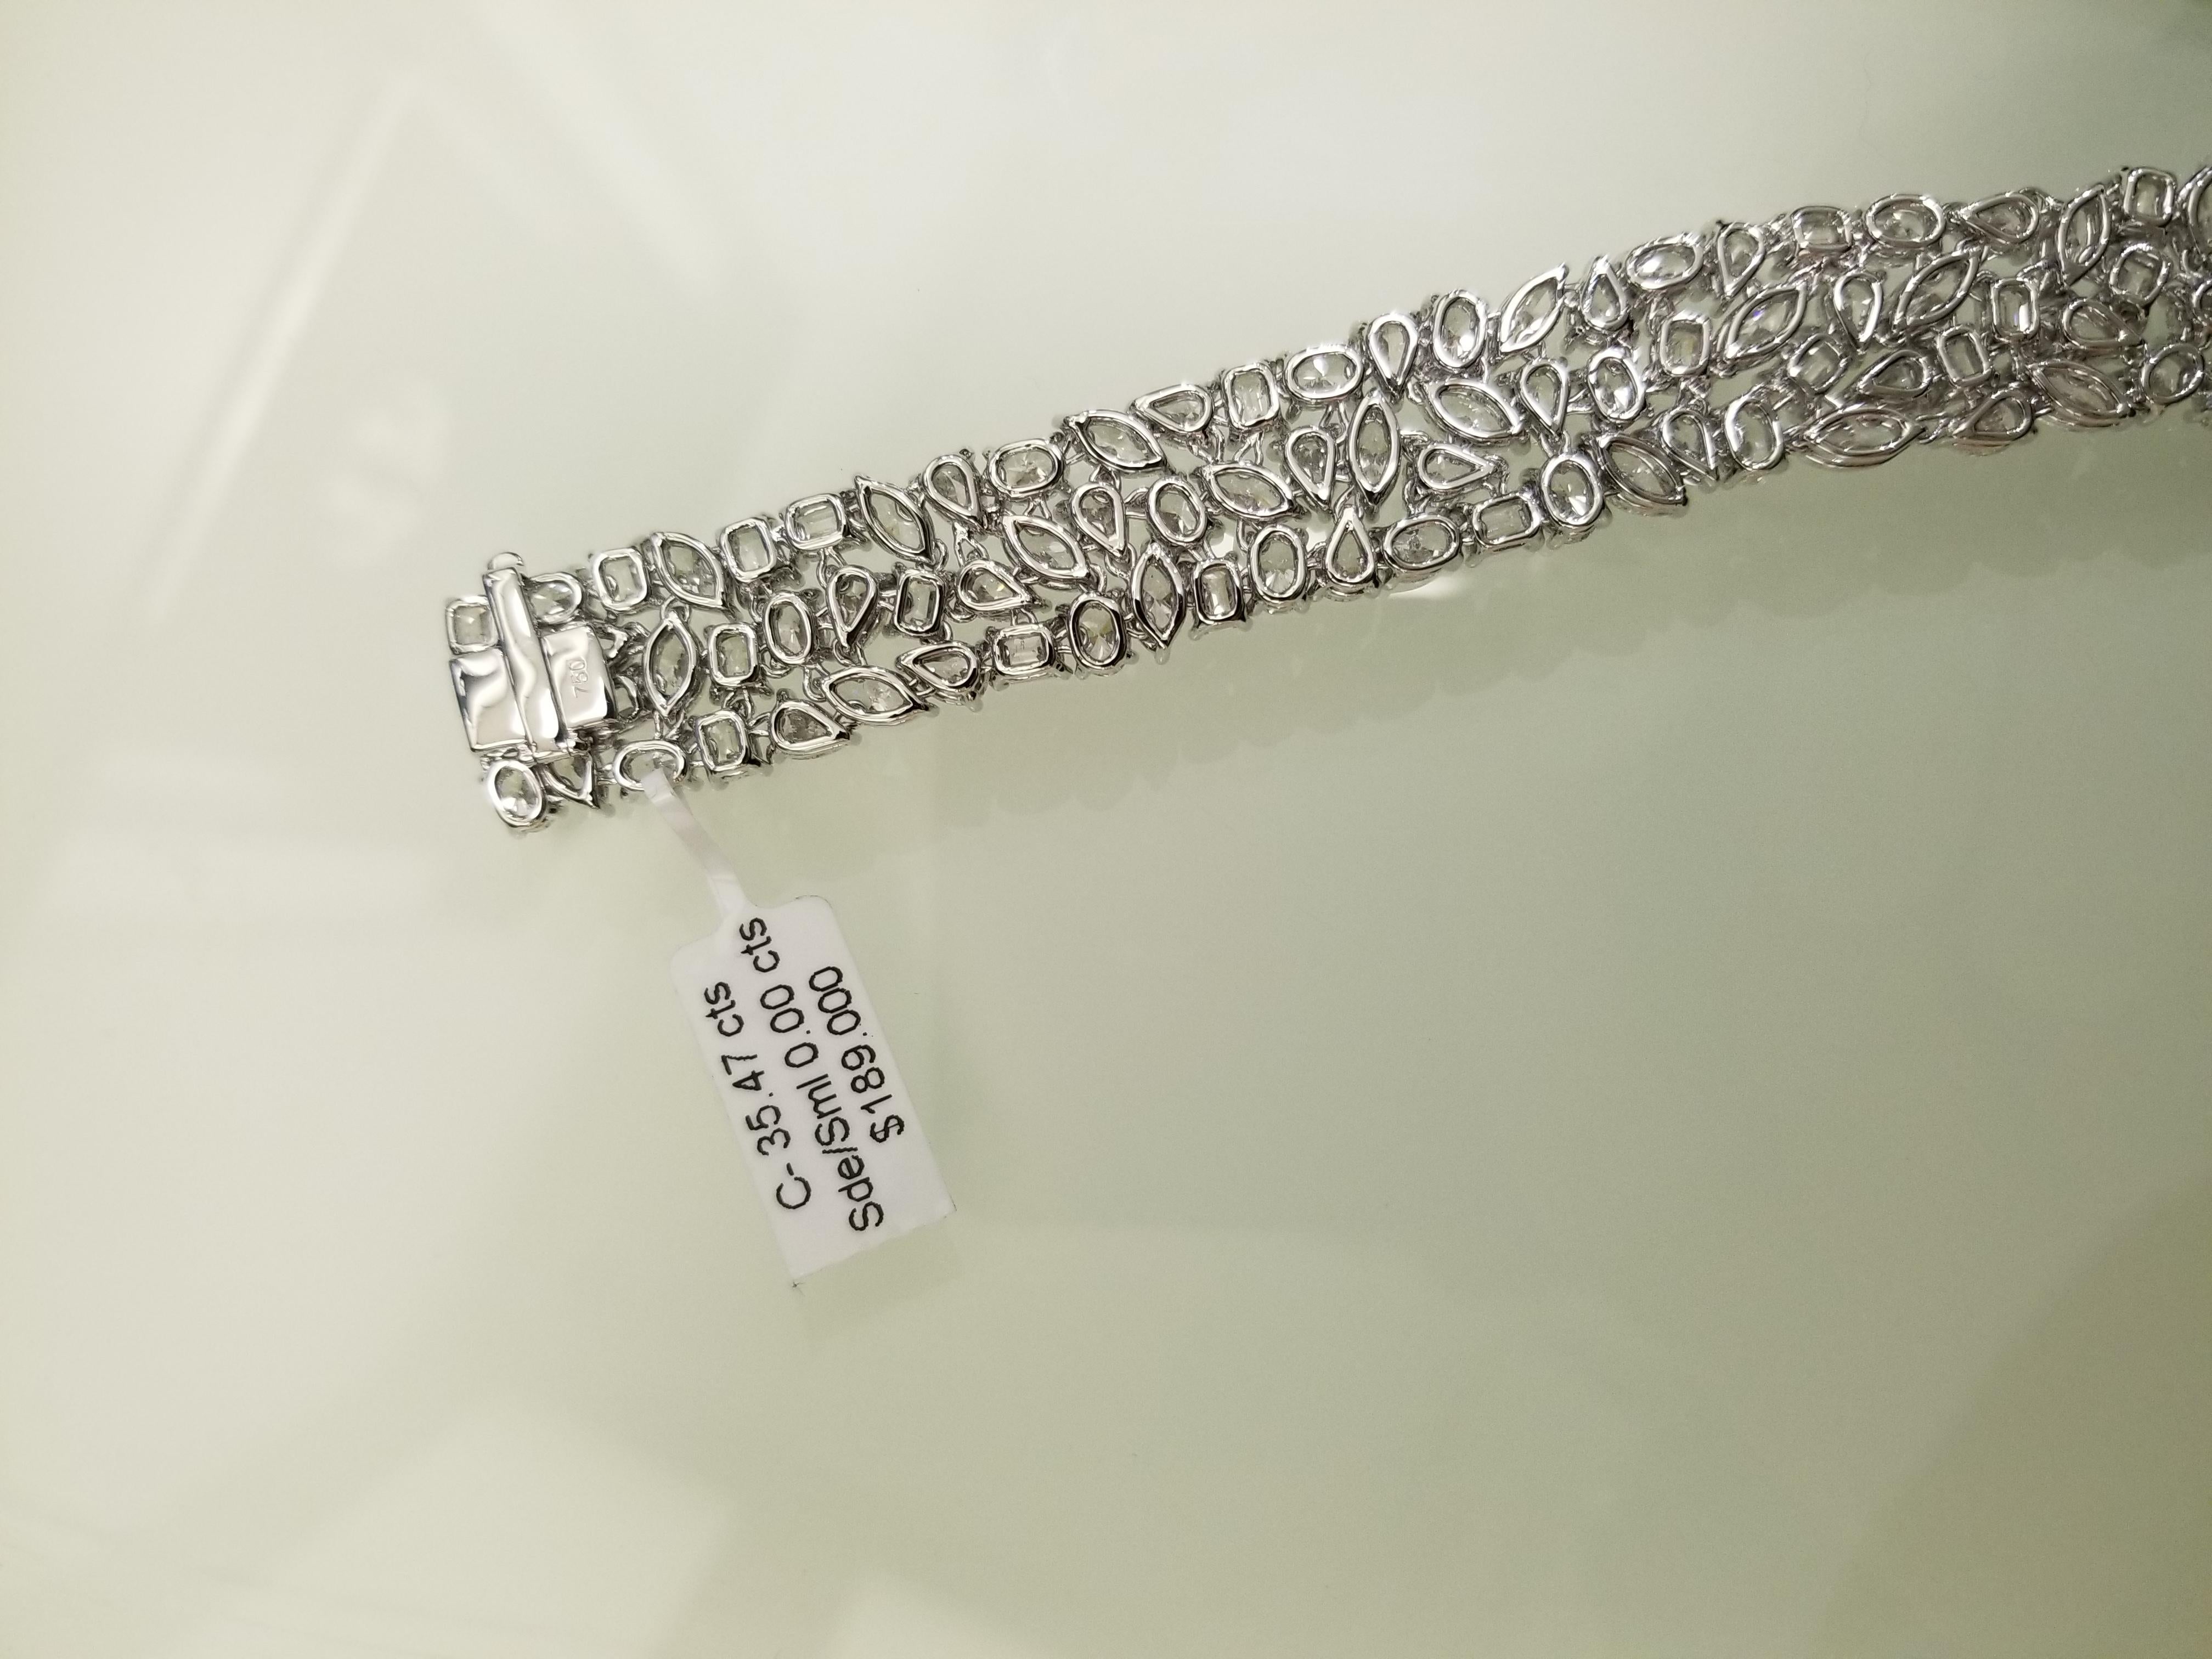 Magnificent bracelets crafted in 18 karat gold containing 35 carats of high quality diamonds This bracelet will easily be your wife's favorite piece and her jewelry collection

Composed with mixed Fancy shape Diamonds put together with my master